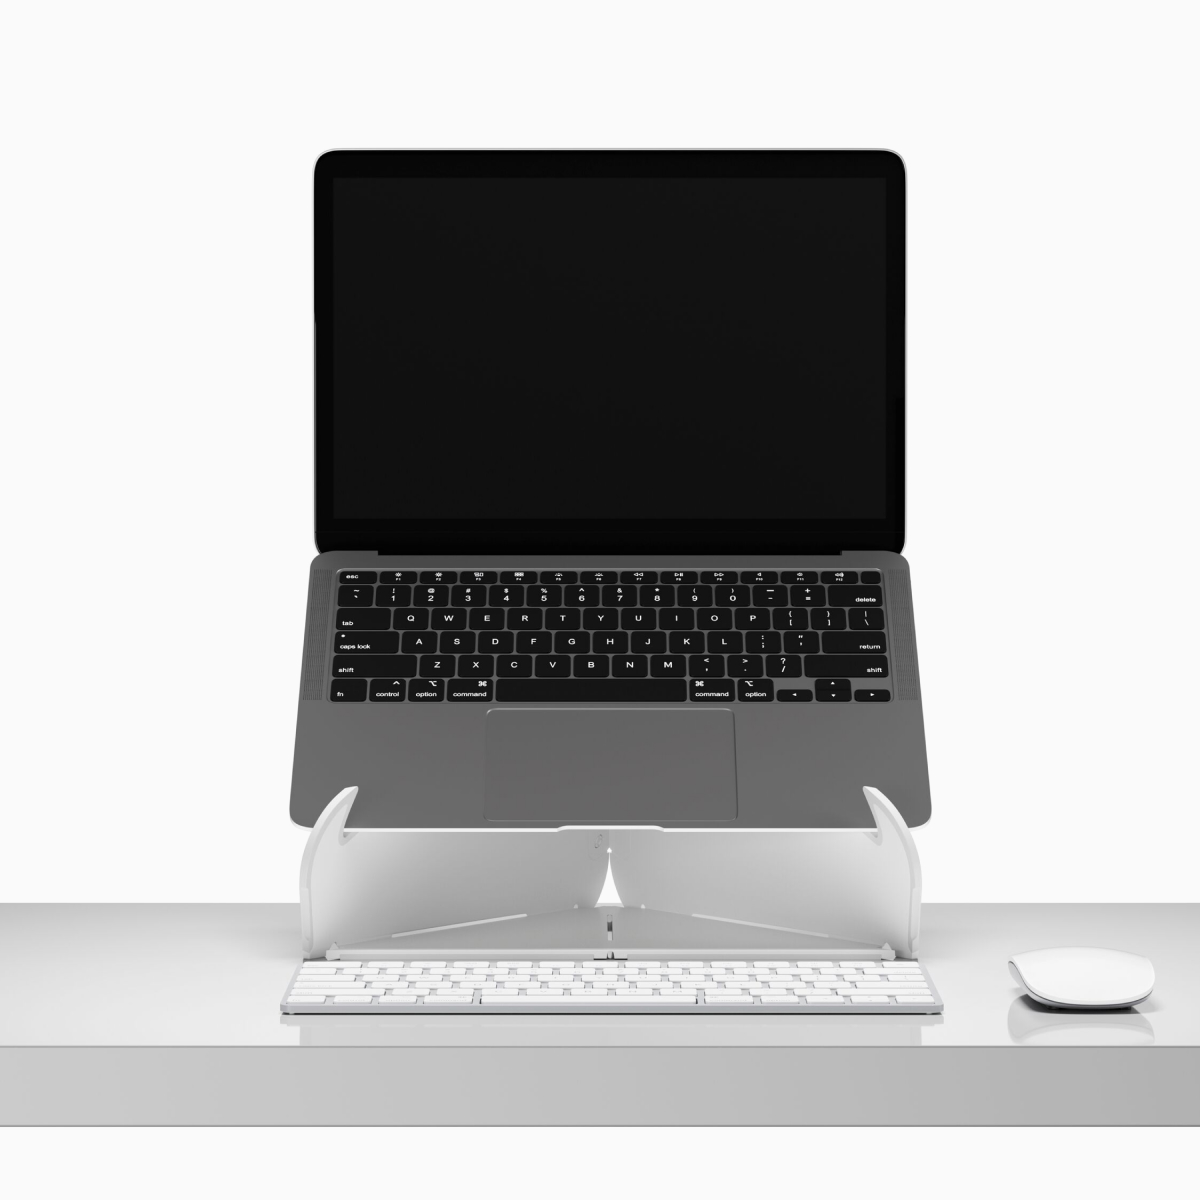 An open laptop raised to eye level on an Oripura Laptop Stand placed on a desk with work tools.